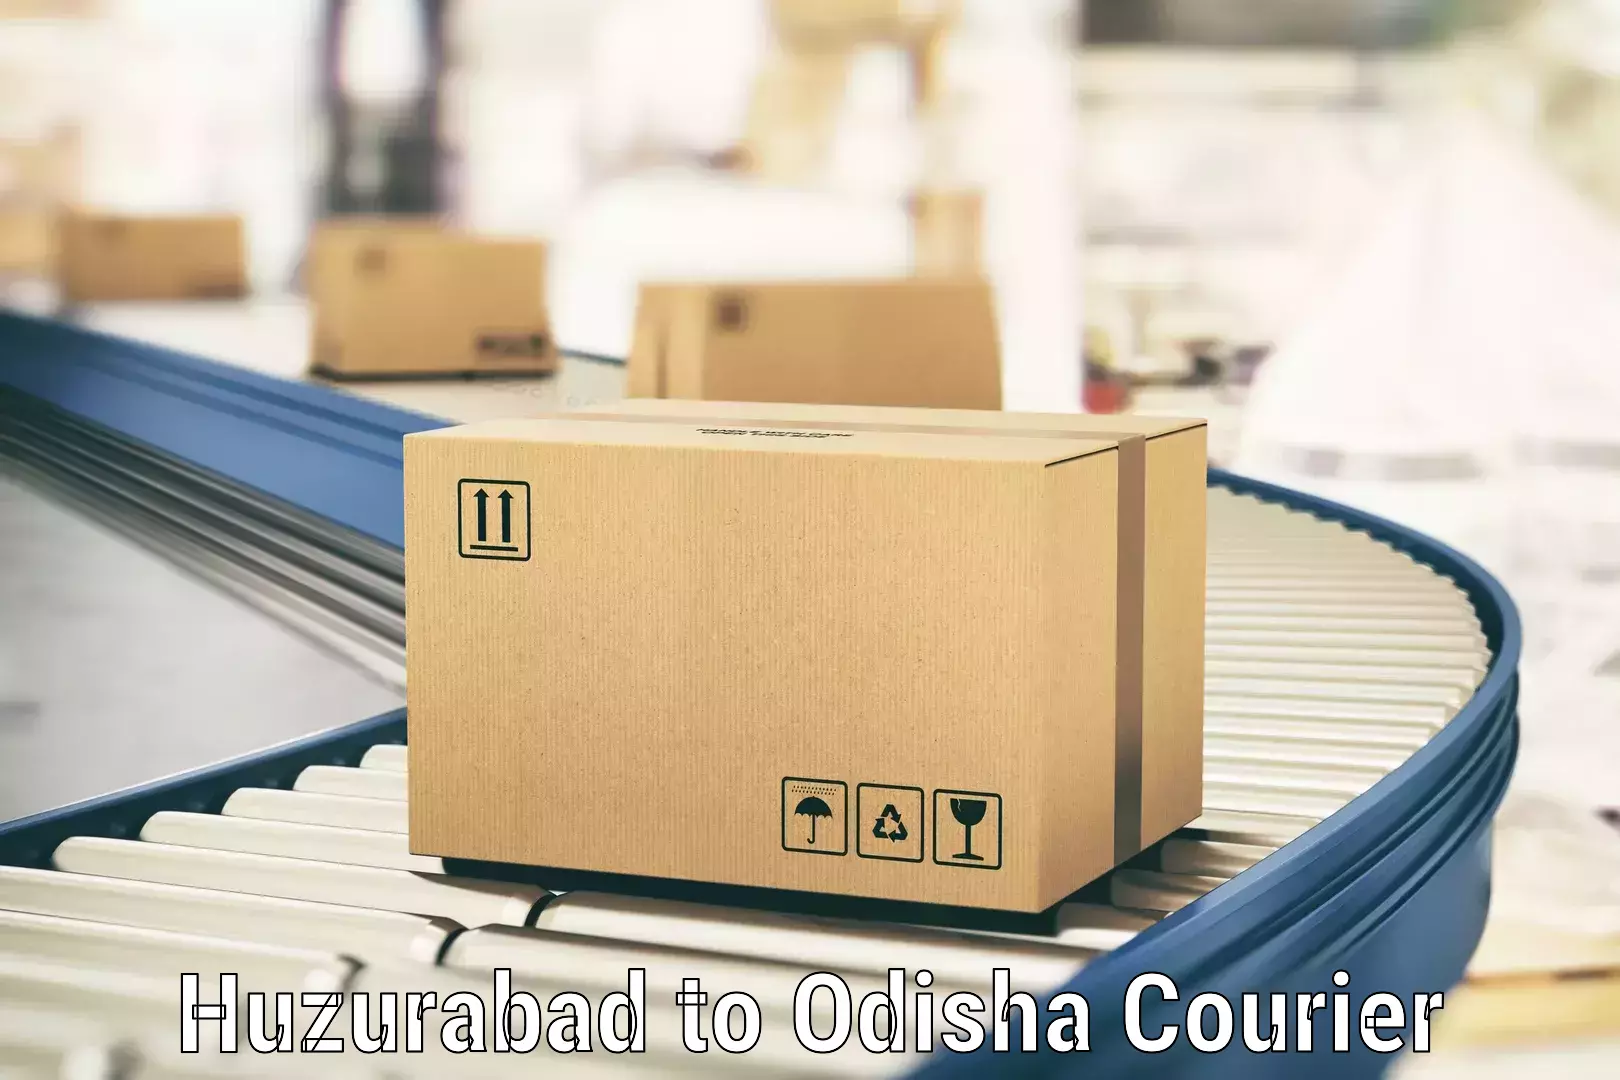 Easy access courier services Huzurabad to Padampur Bargarh